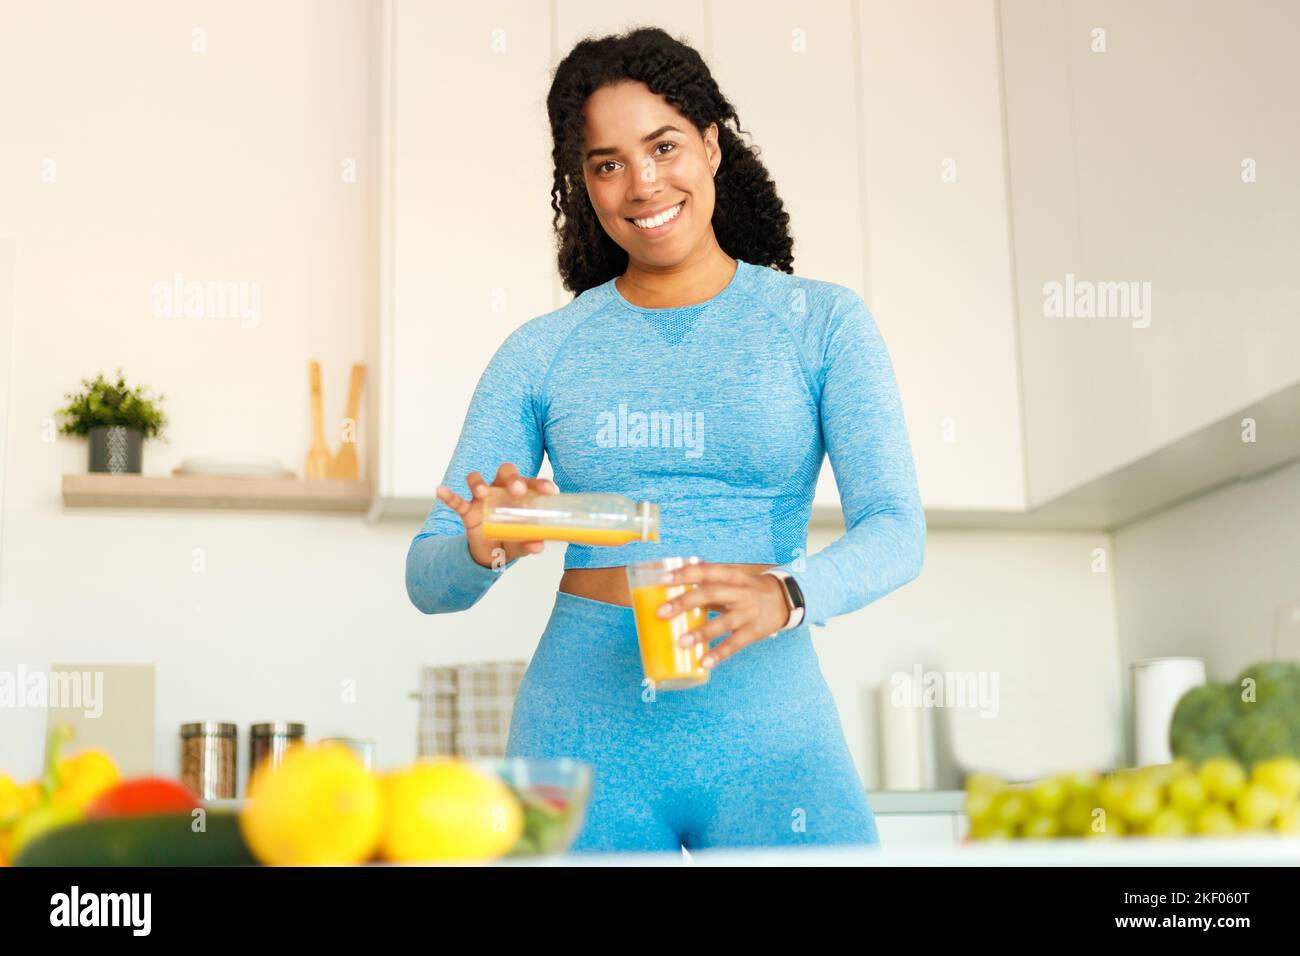 https://c8.alamy.com/comp/2KF060T/positive-black-fit-woman-enjoying-tasty-lunch-and-pouring-orange-juice-from-jug-to-glass-standing-in-kitchen-at-home-2KF060T.jpg